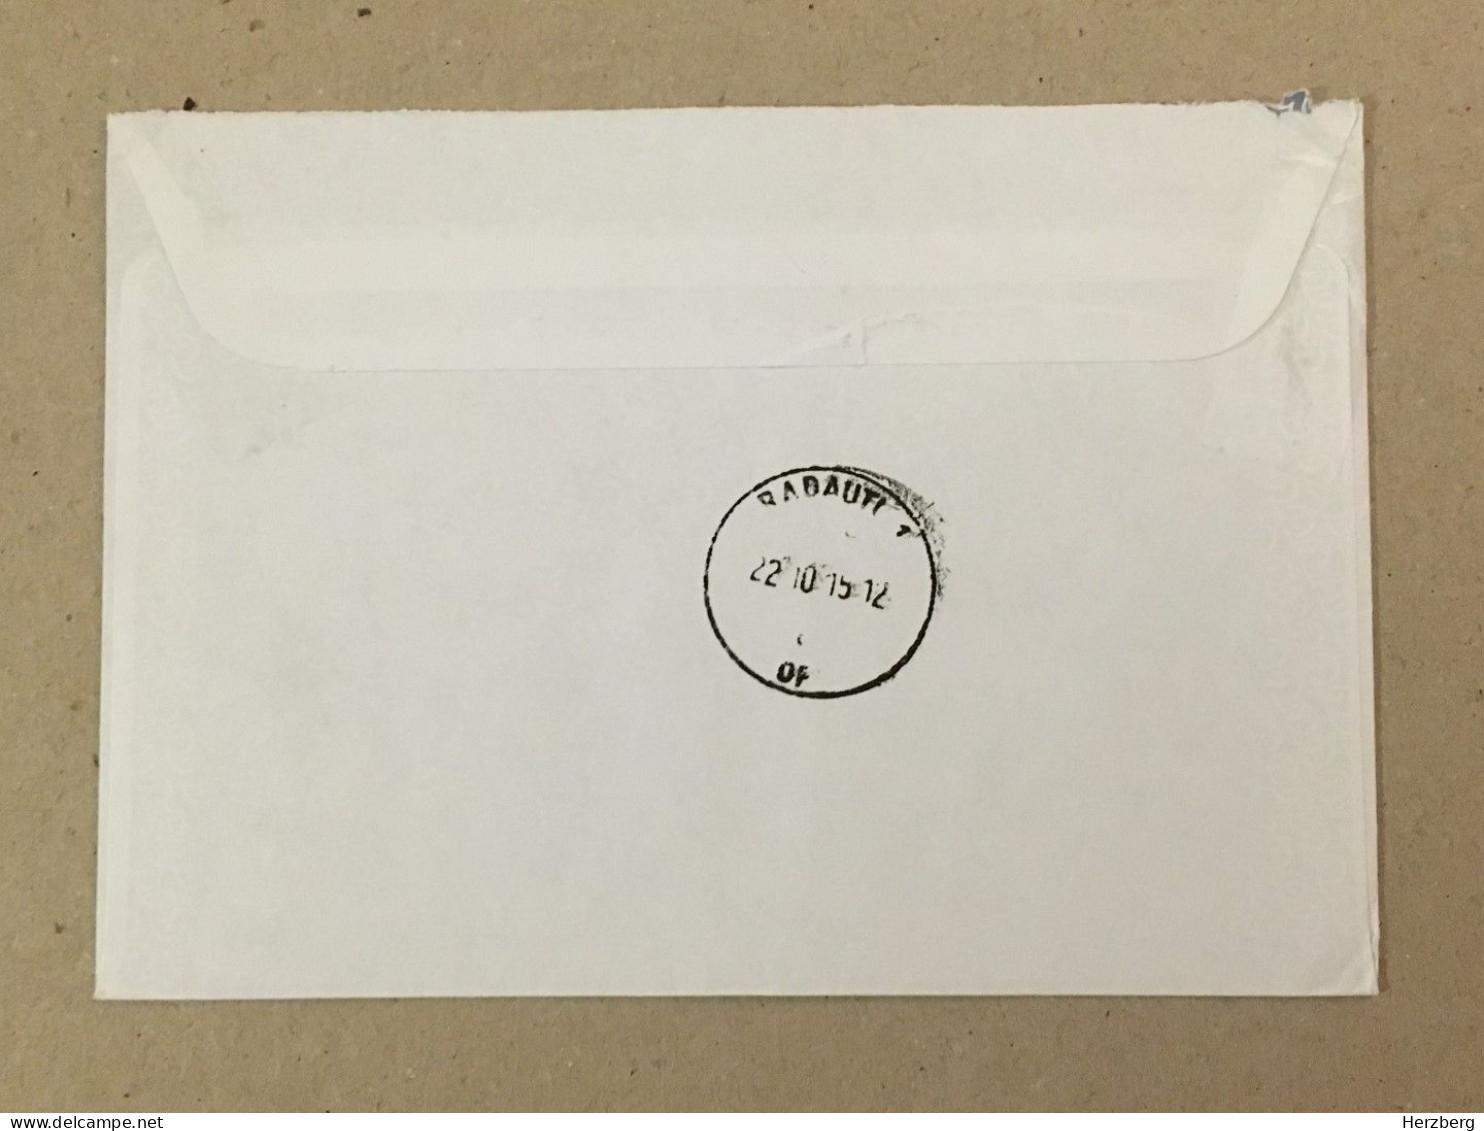 Hungary Magyarorszag Used Letter Stamp Circulated Cover Postal Label Printed Sticker Stamp 2015 - Briefe U. Dokumente